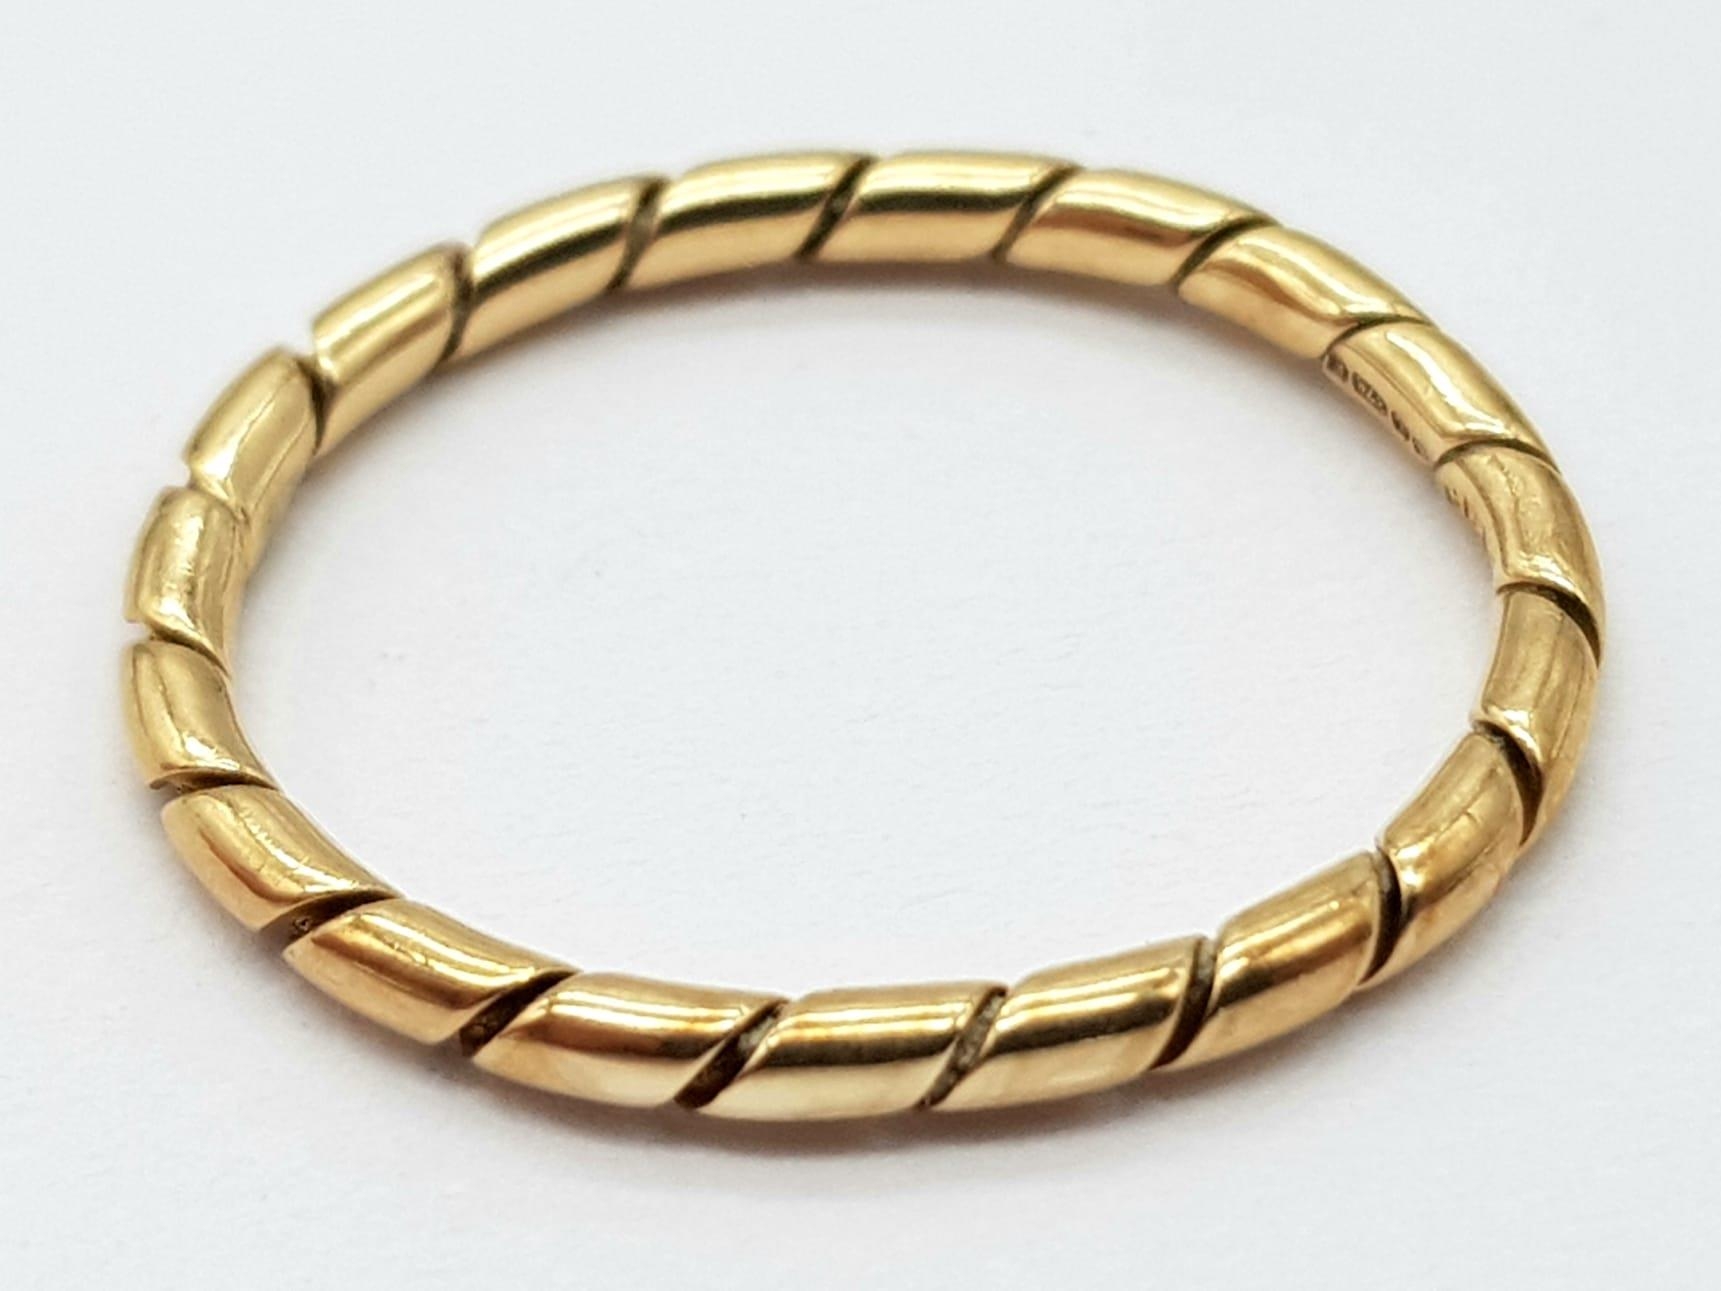 A Vintage 9K Yellow Gold Thin Band Ring with Diagonal Ridged Design. Size K. 1.33g. 2mm - Image 2 of 4